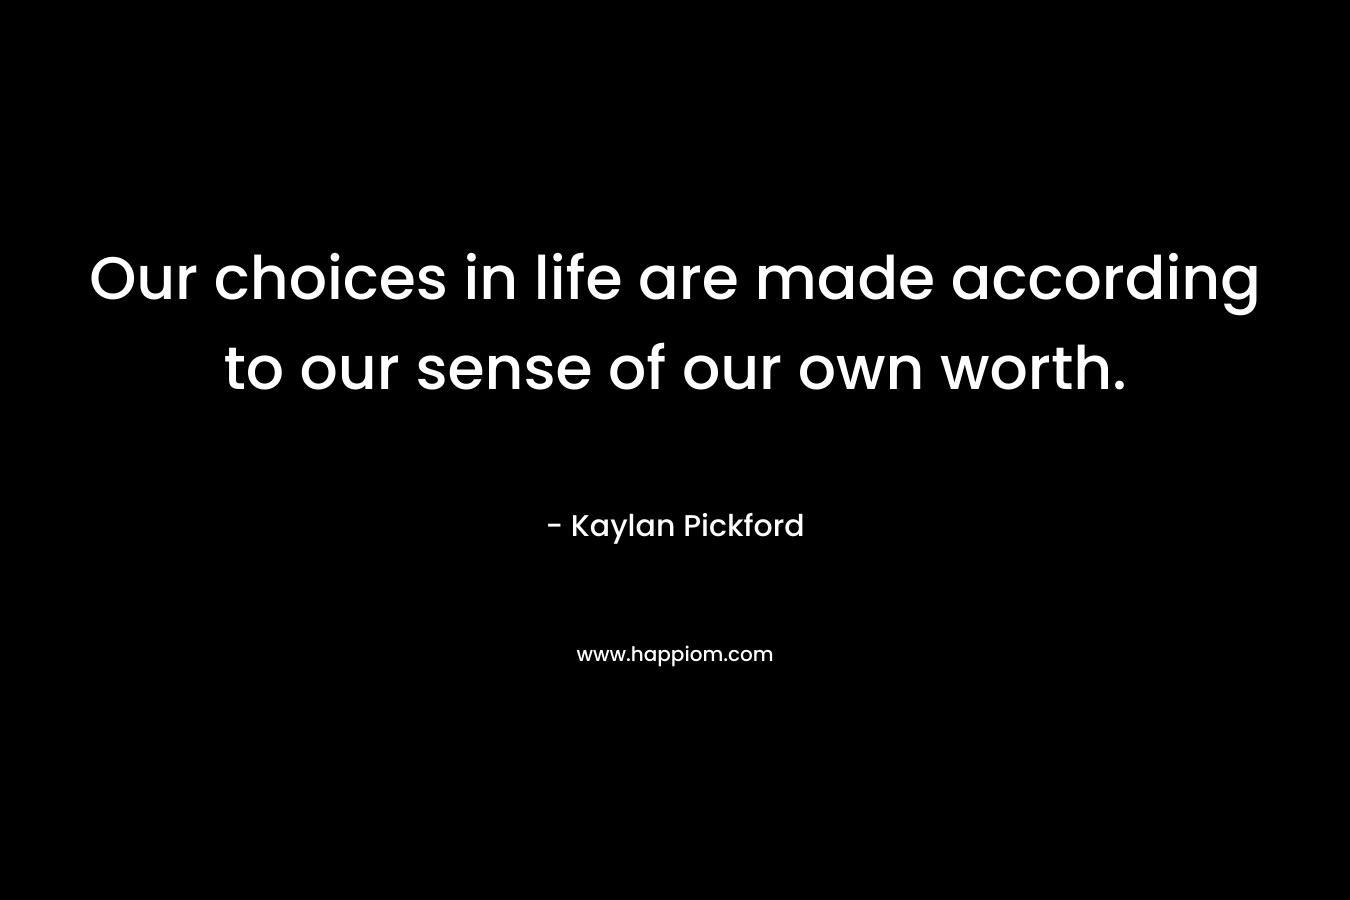 Our choices in life are made according to our sense of our own worth.